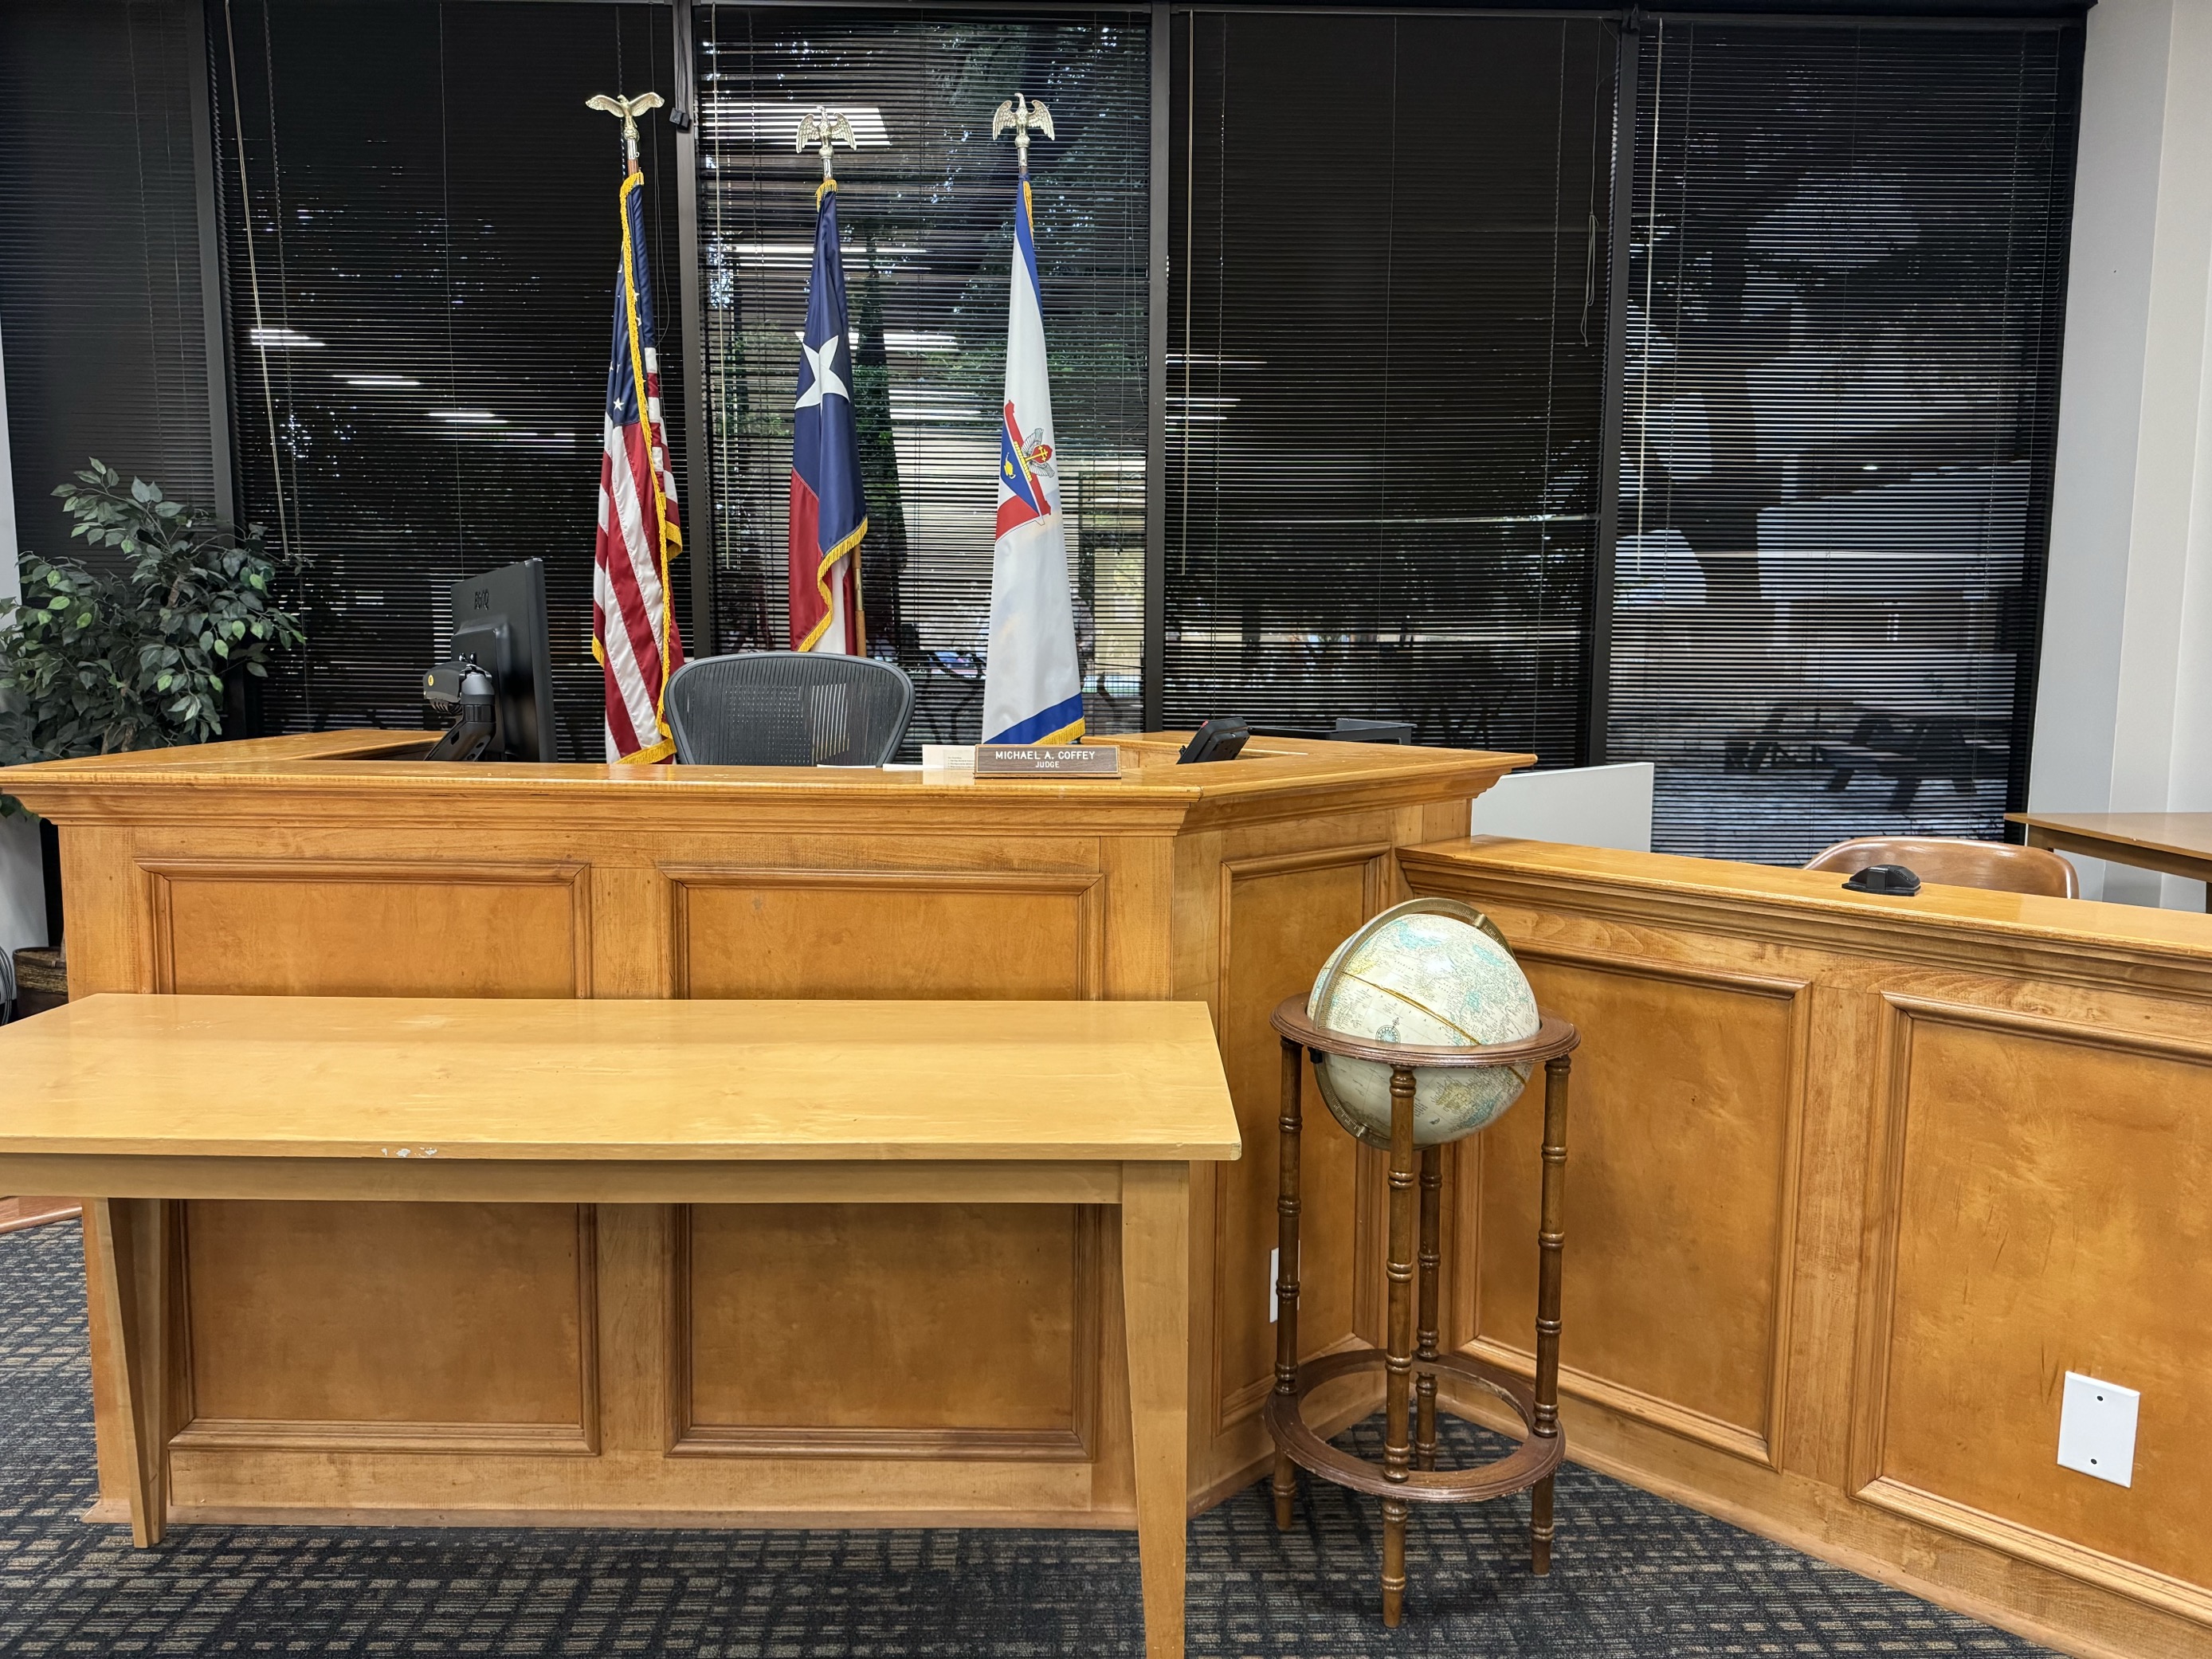 Image of one of the Municipal Court court rooms